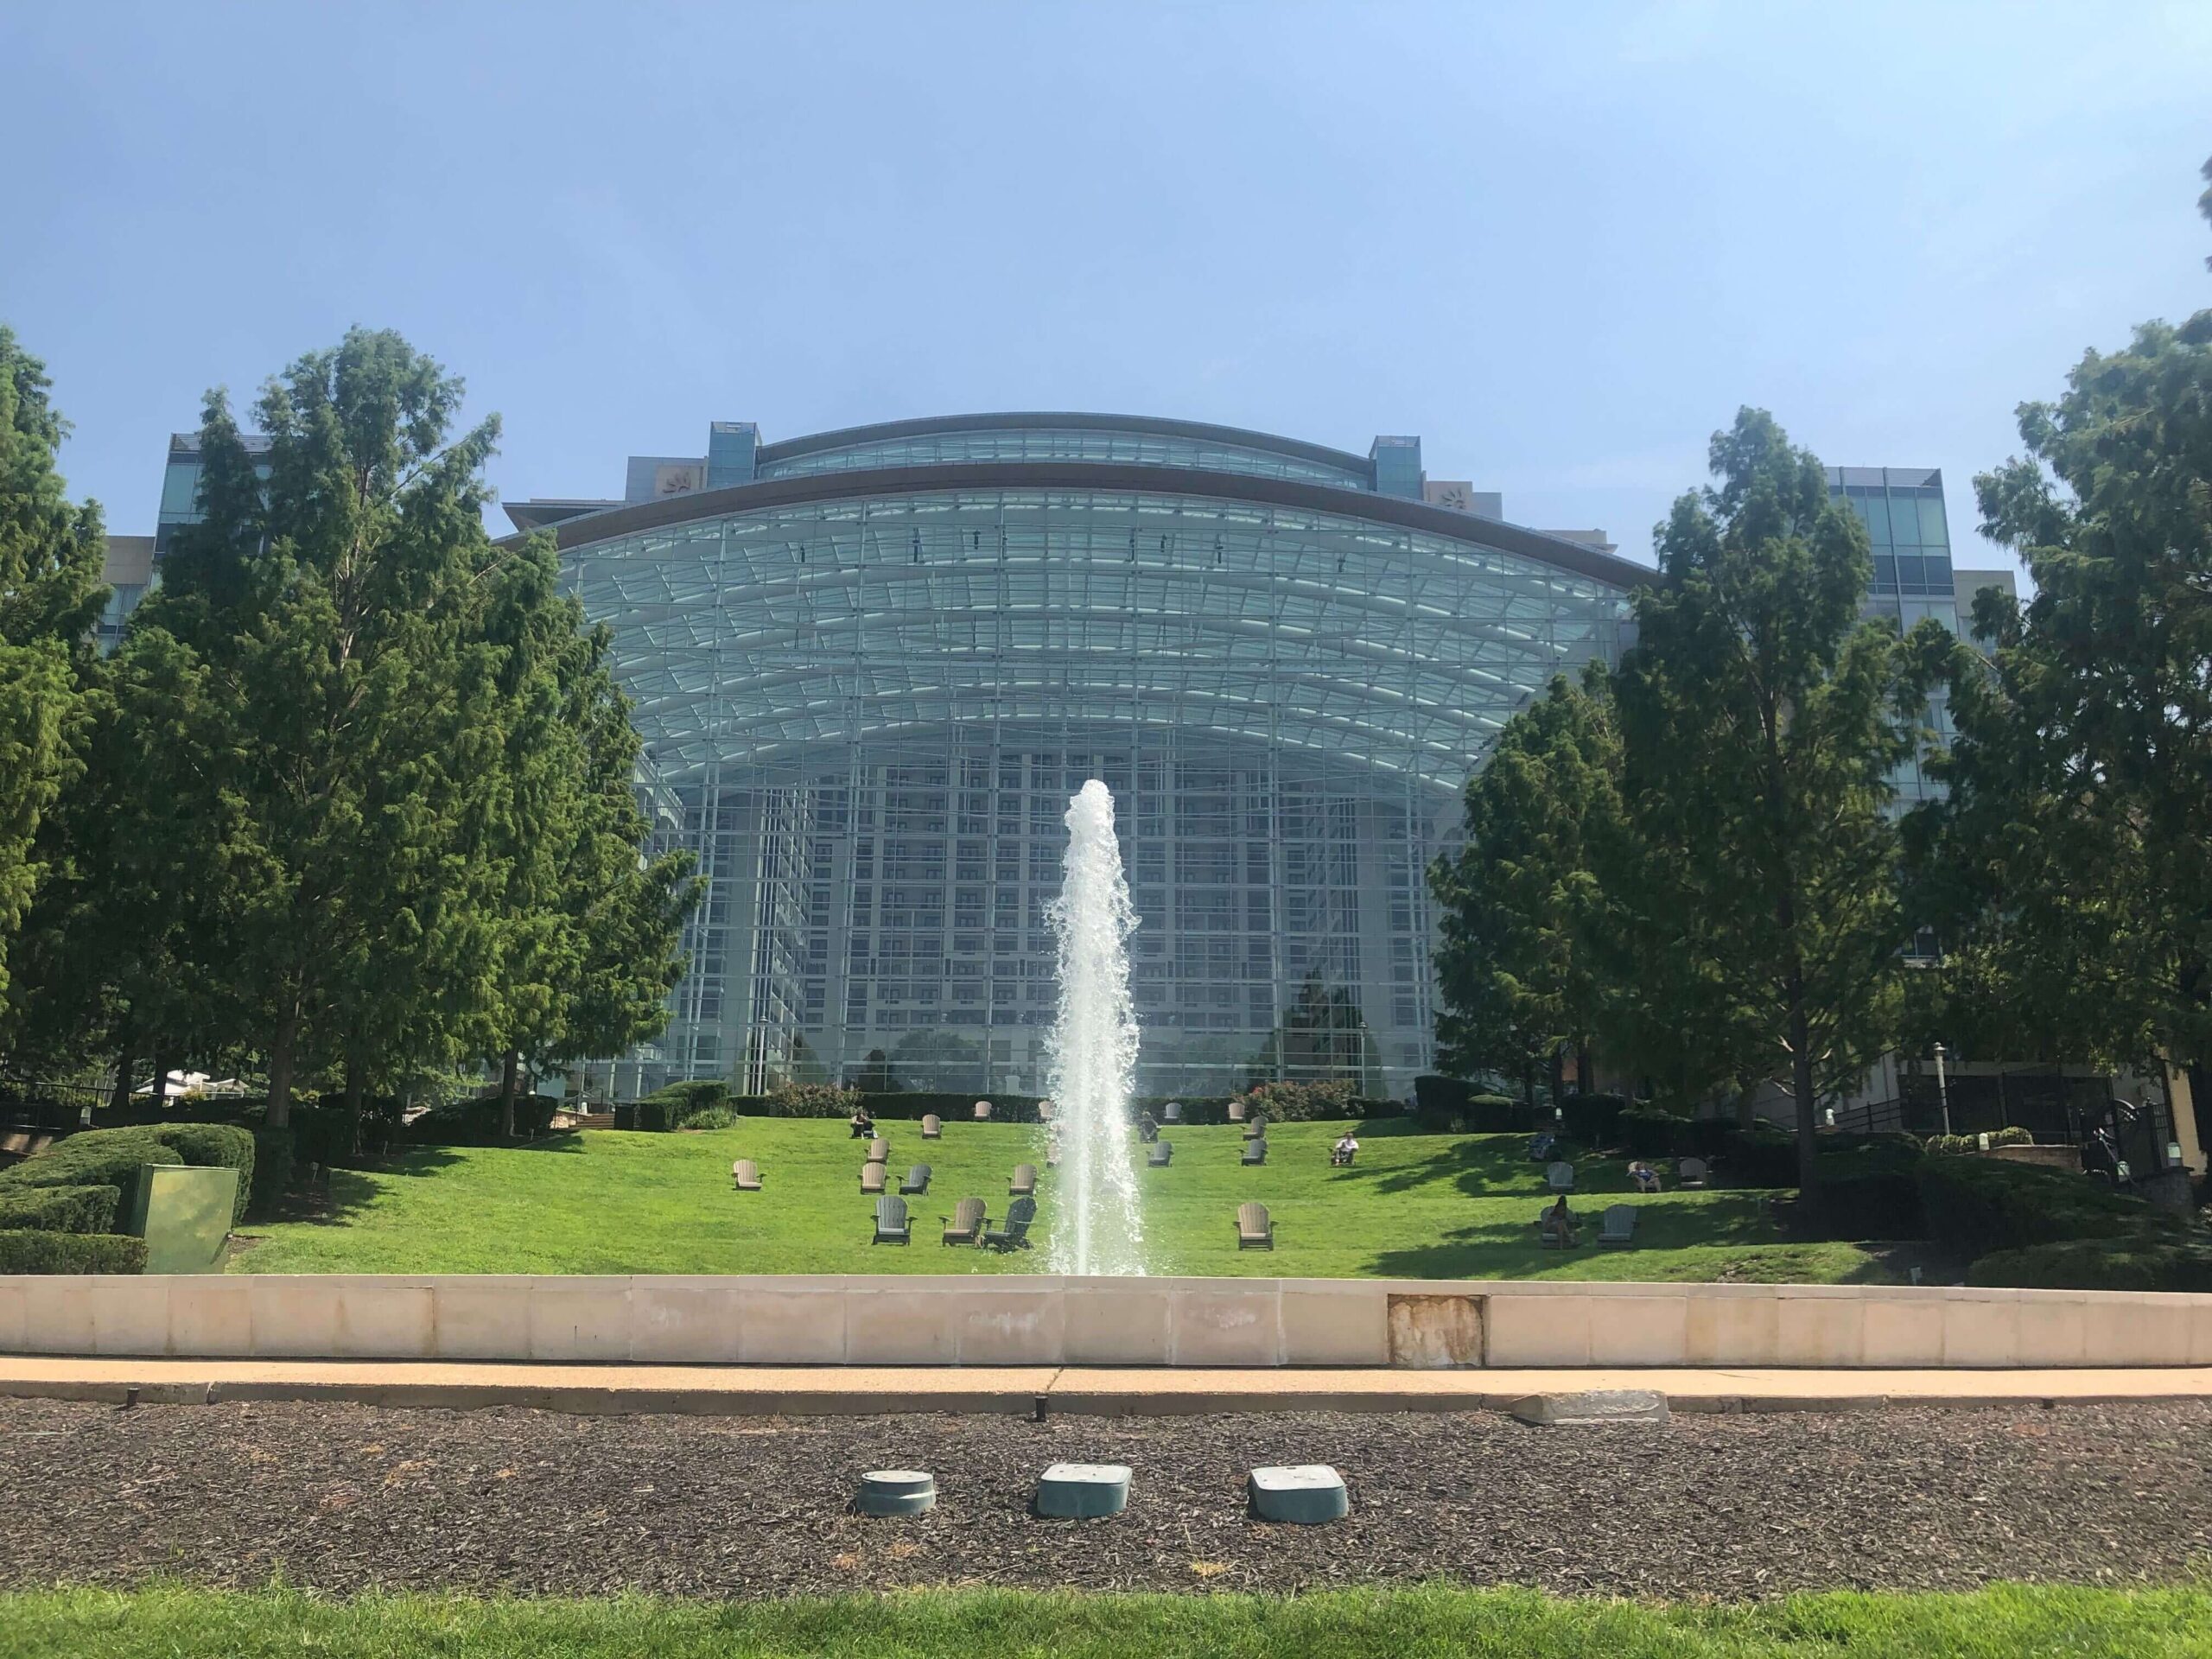 Gaylord National Converntion Center in National Harbor, Maryland.